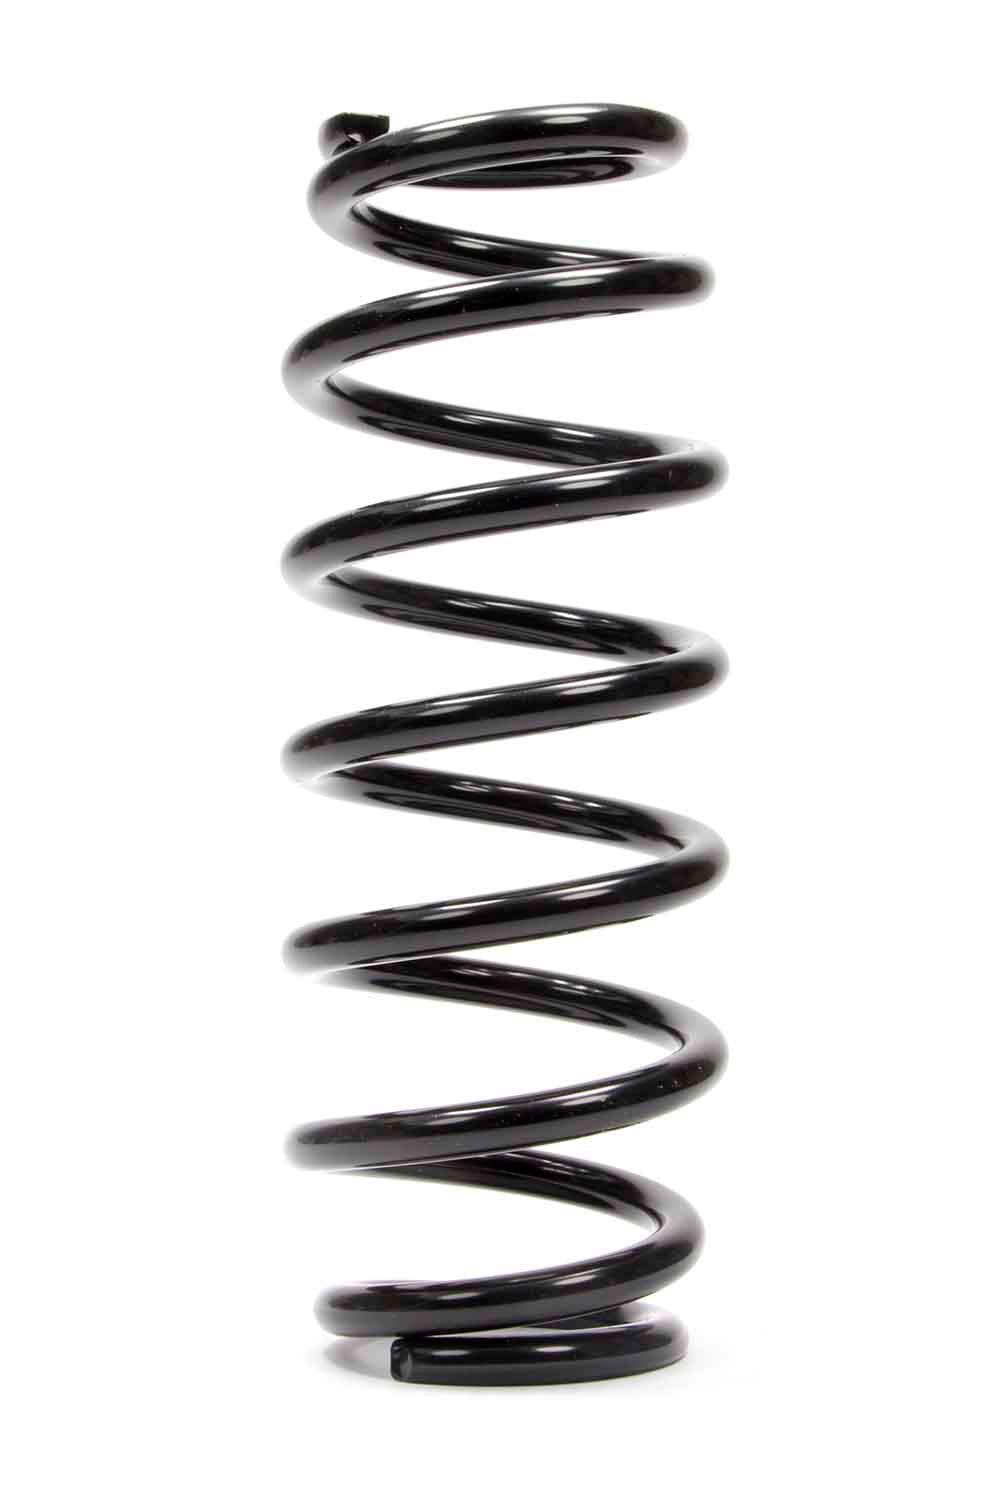 Coil-Over Spring 12in x 2.625in x 225lb - Burlile Performance Products